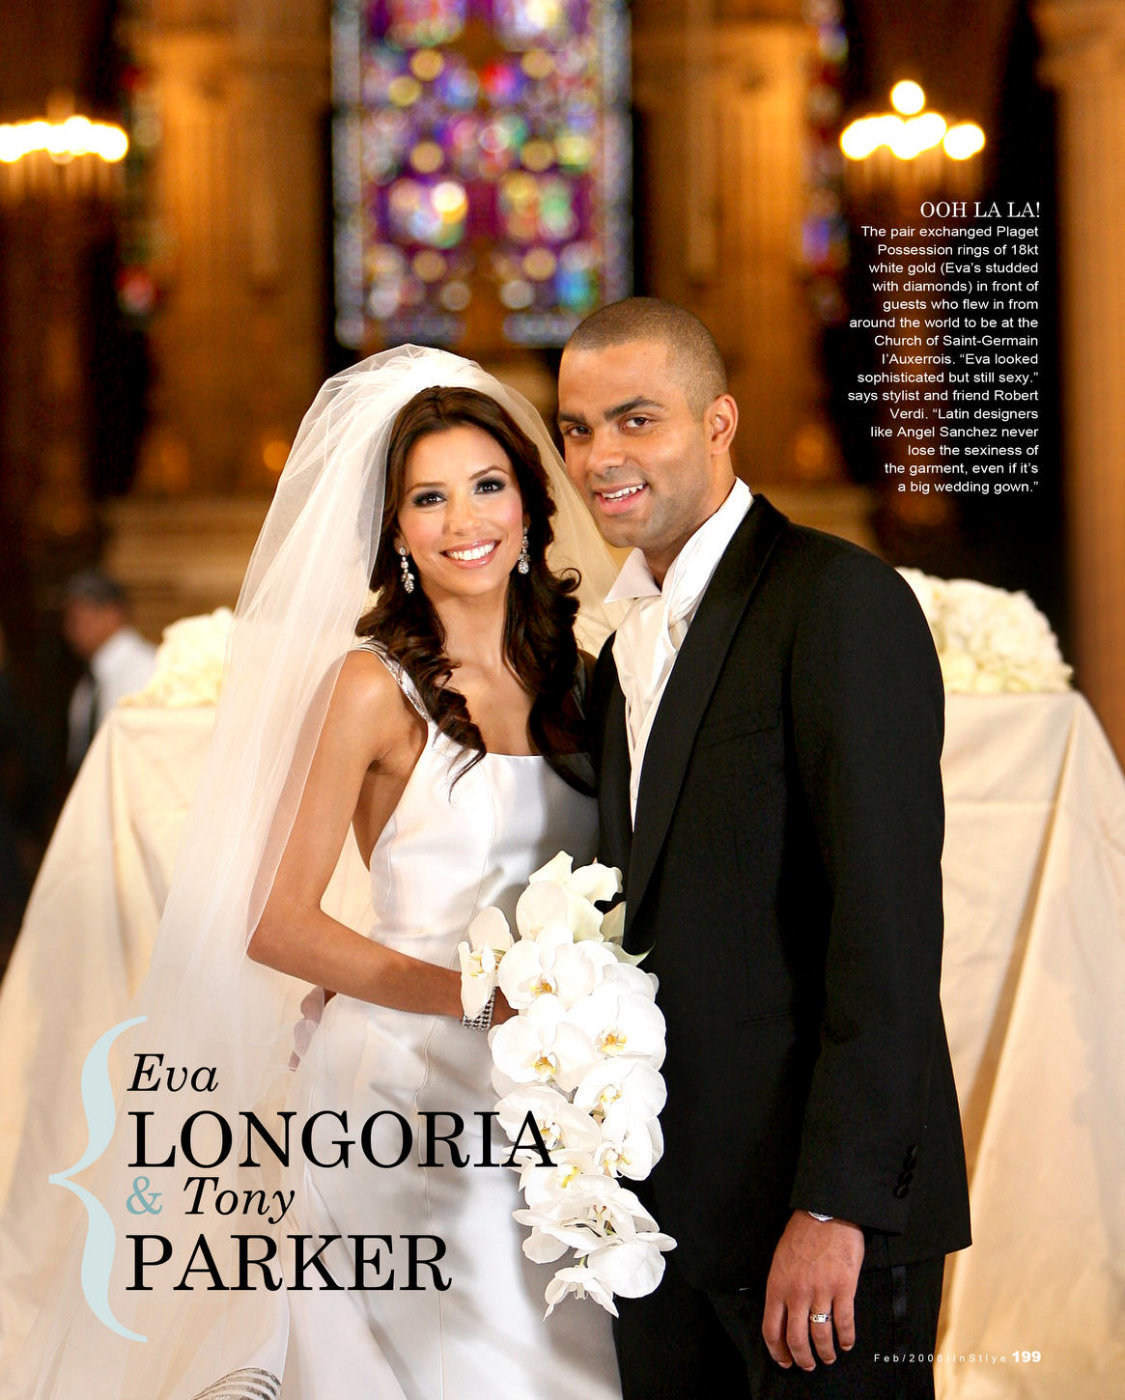 We were honored to work with Party Planner extraordinaire Mindy Weiss on Eva Longoria and Tony Parker's wedding and thrilled to be the exclusive photographers for six consecutive days in Paris, France. We floated on a yacht down the Seine, we spent the day at Coco Chanel's private residence, and ended with a spectacular wedding at the beautiful Château de Vaux-le-Vicomte. Every day was beyond exceptional. We were thrilled when InStyle published this sweet 1 year anniversary featuring Eva and Tony and many other celebrity weddings that took place in 2007.